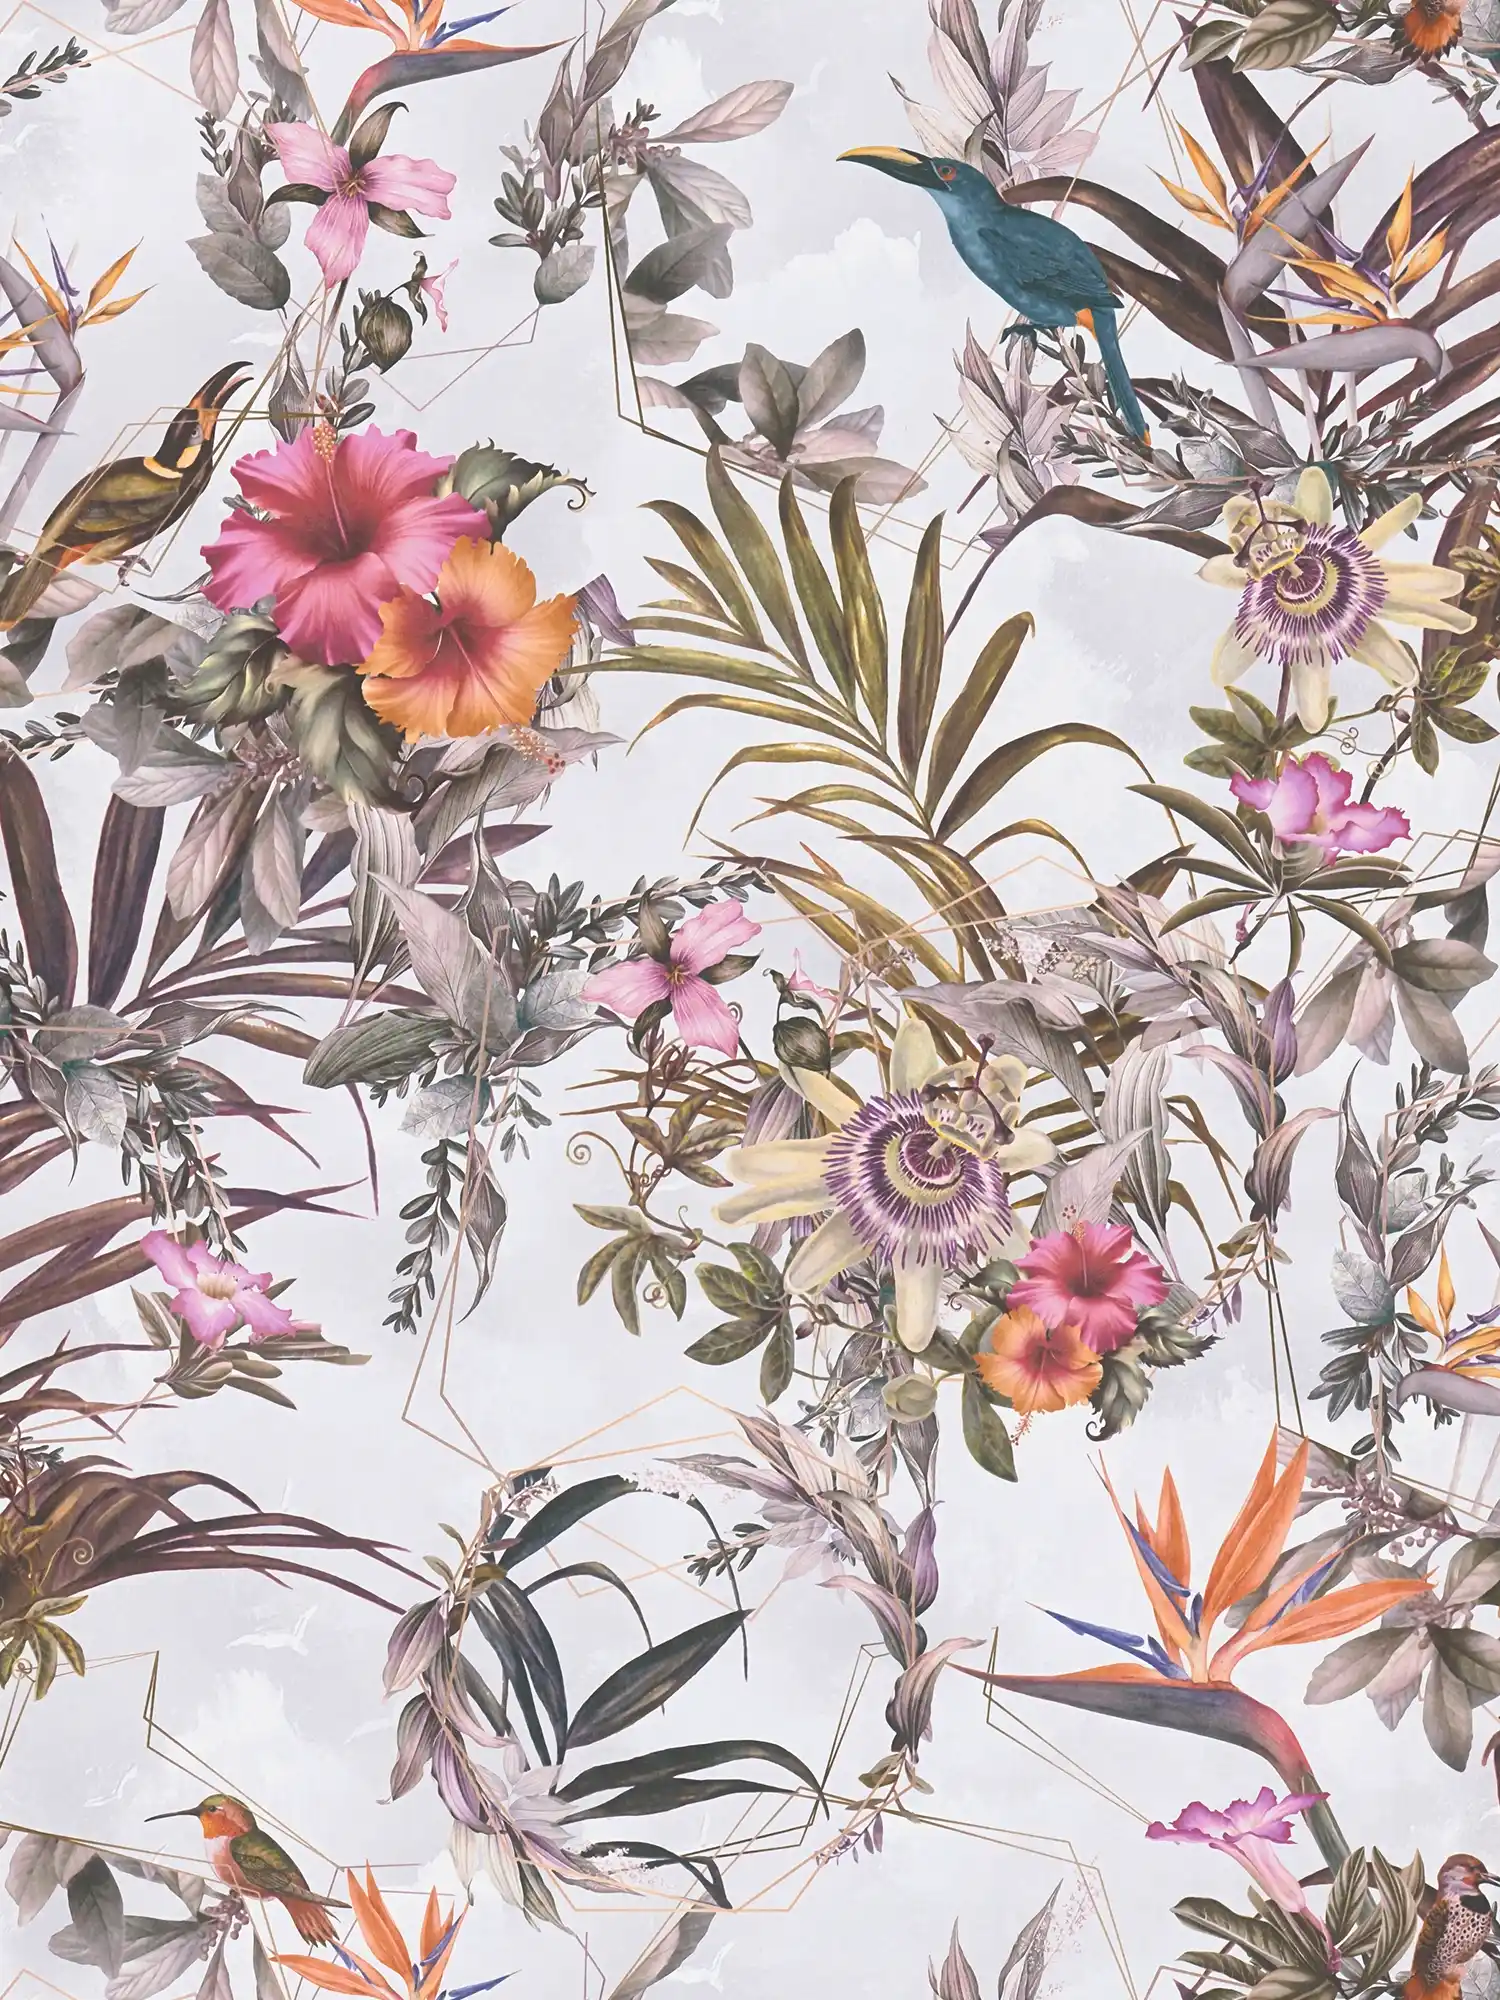 Watercolour style tropical flowers wallpaper - grey, green
